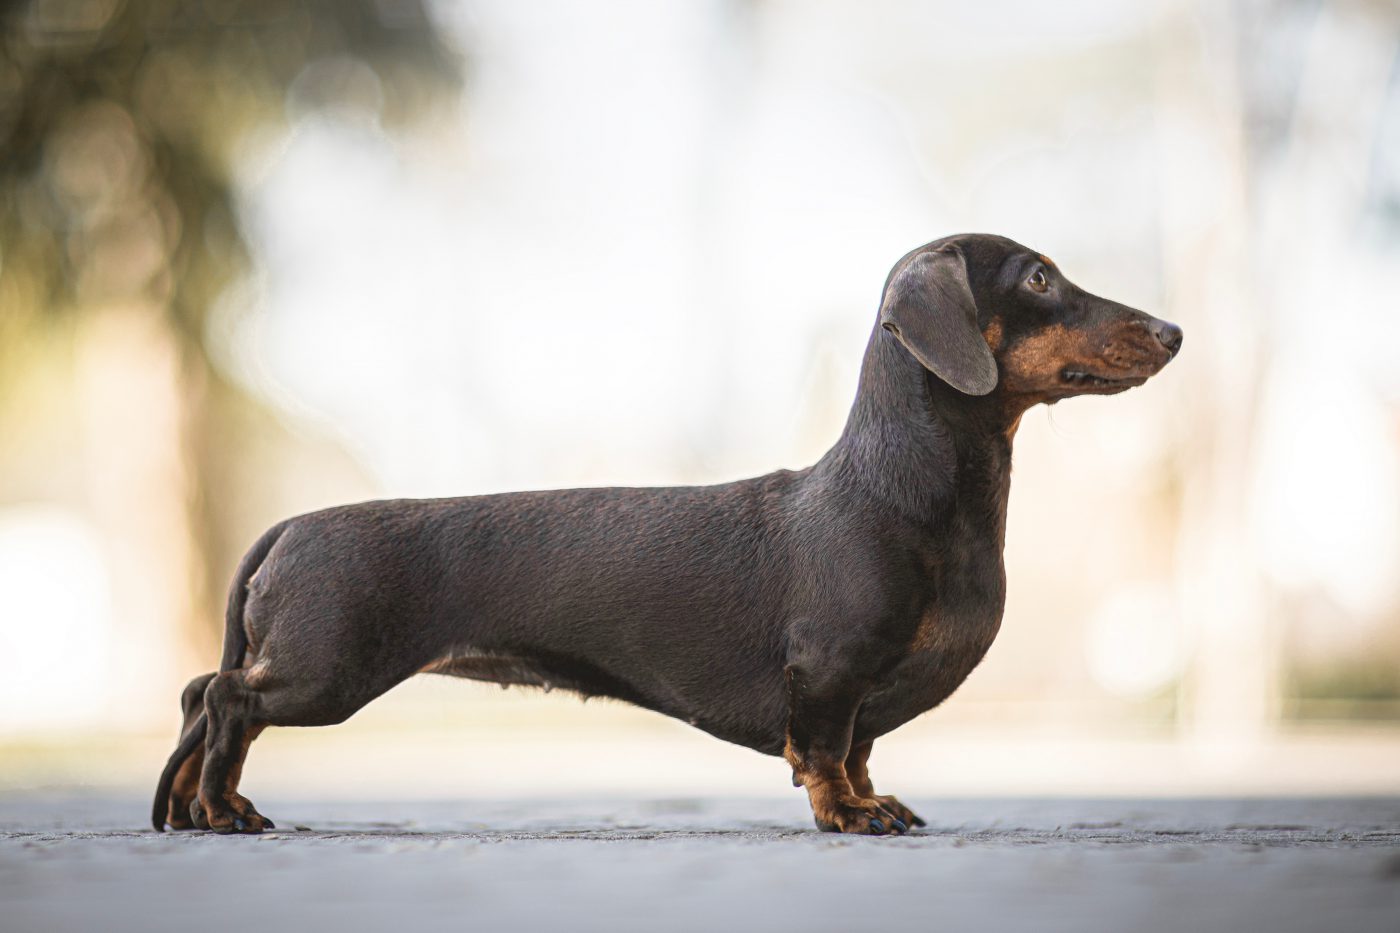 The Dachshund Guide History, Personality, Food, Training